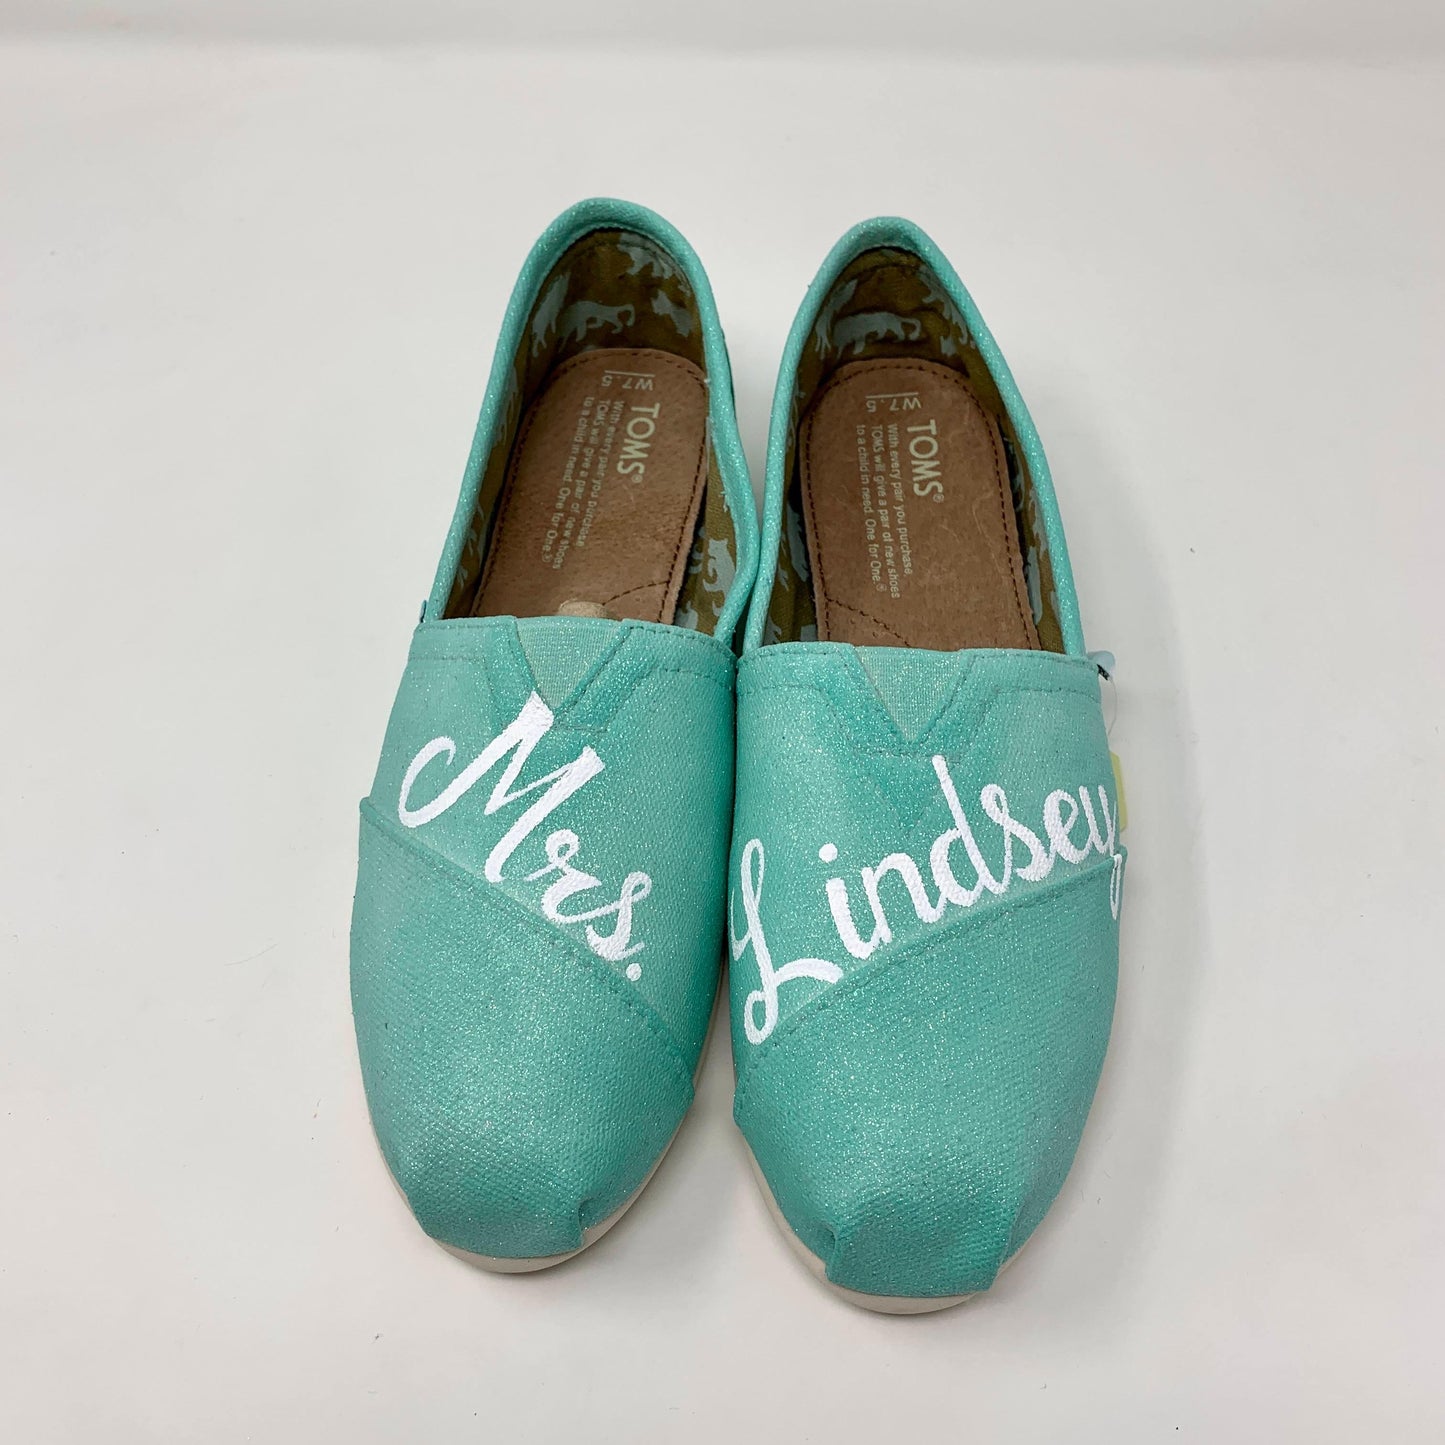 Aqua Glitter Wedding Shoes-Shoes-ButterMakesMeHappy